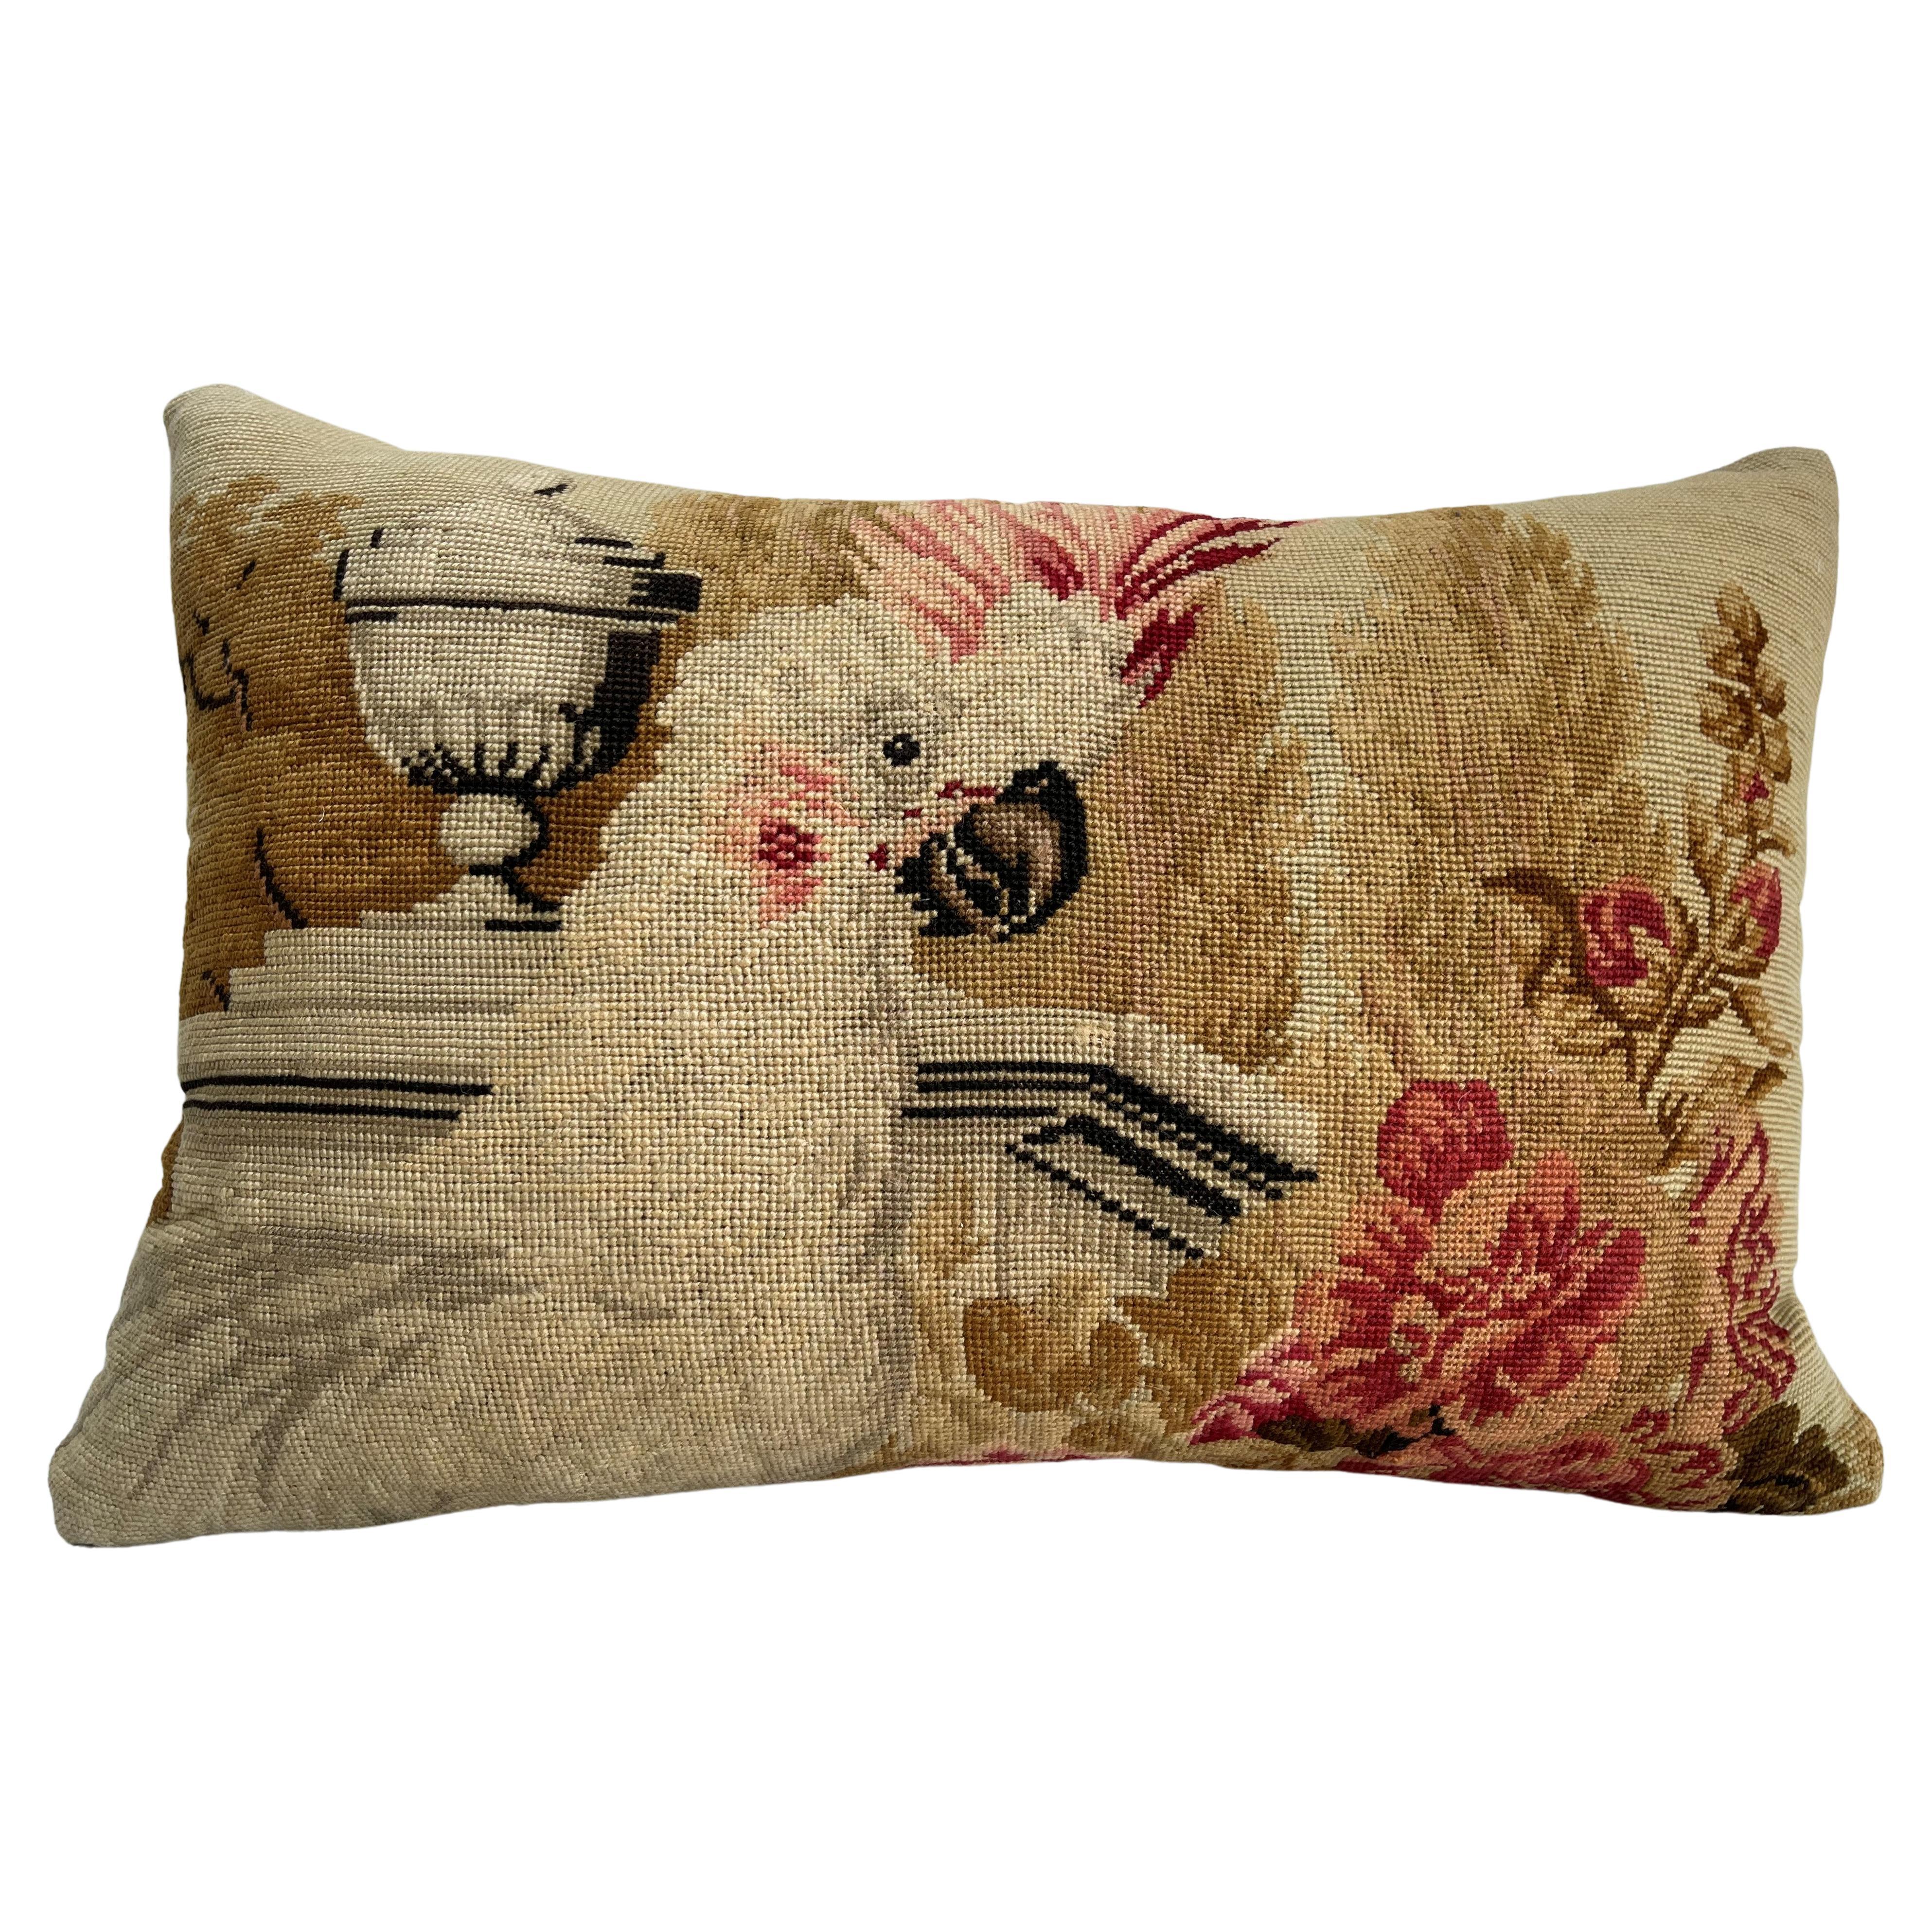 Early-19th Century English Tapestry Pillow 14" X 8"